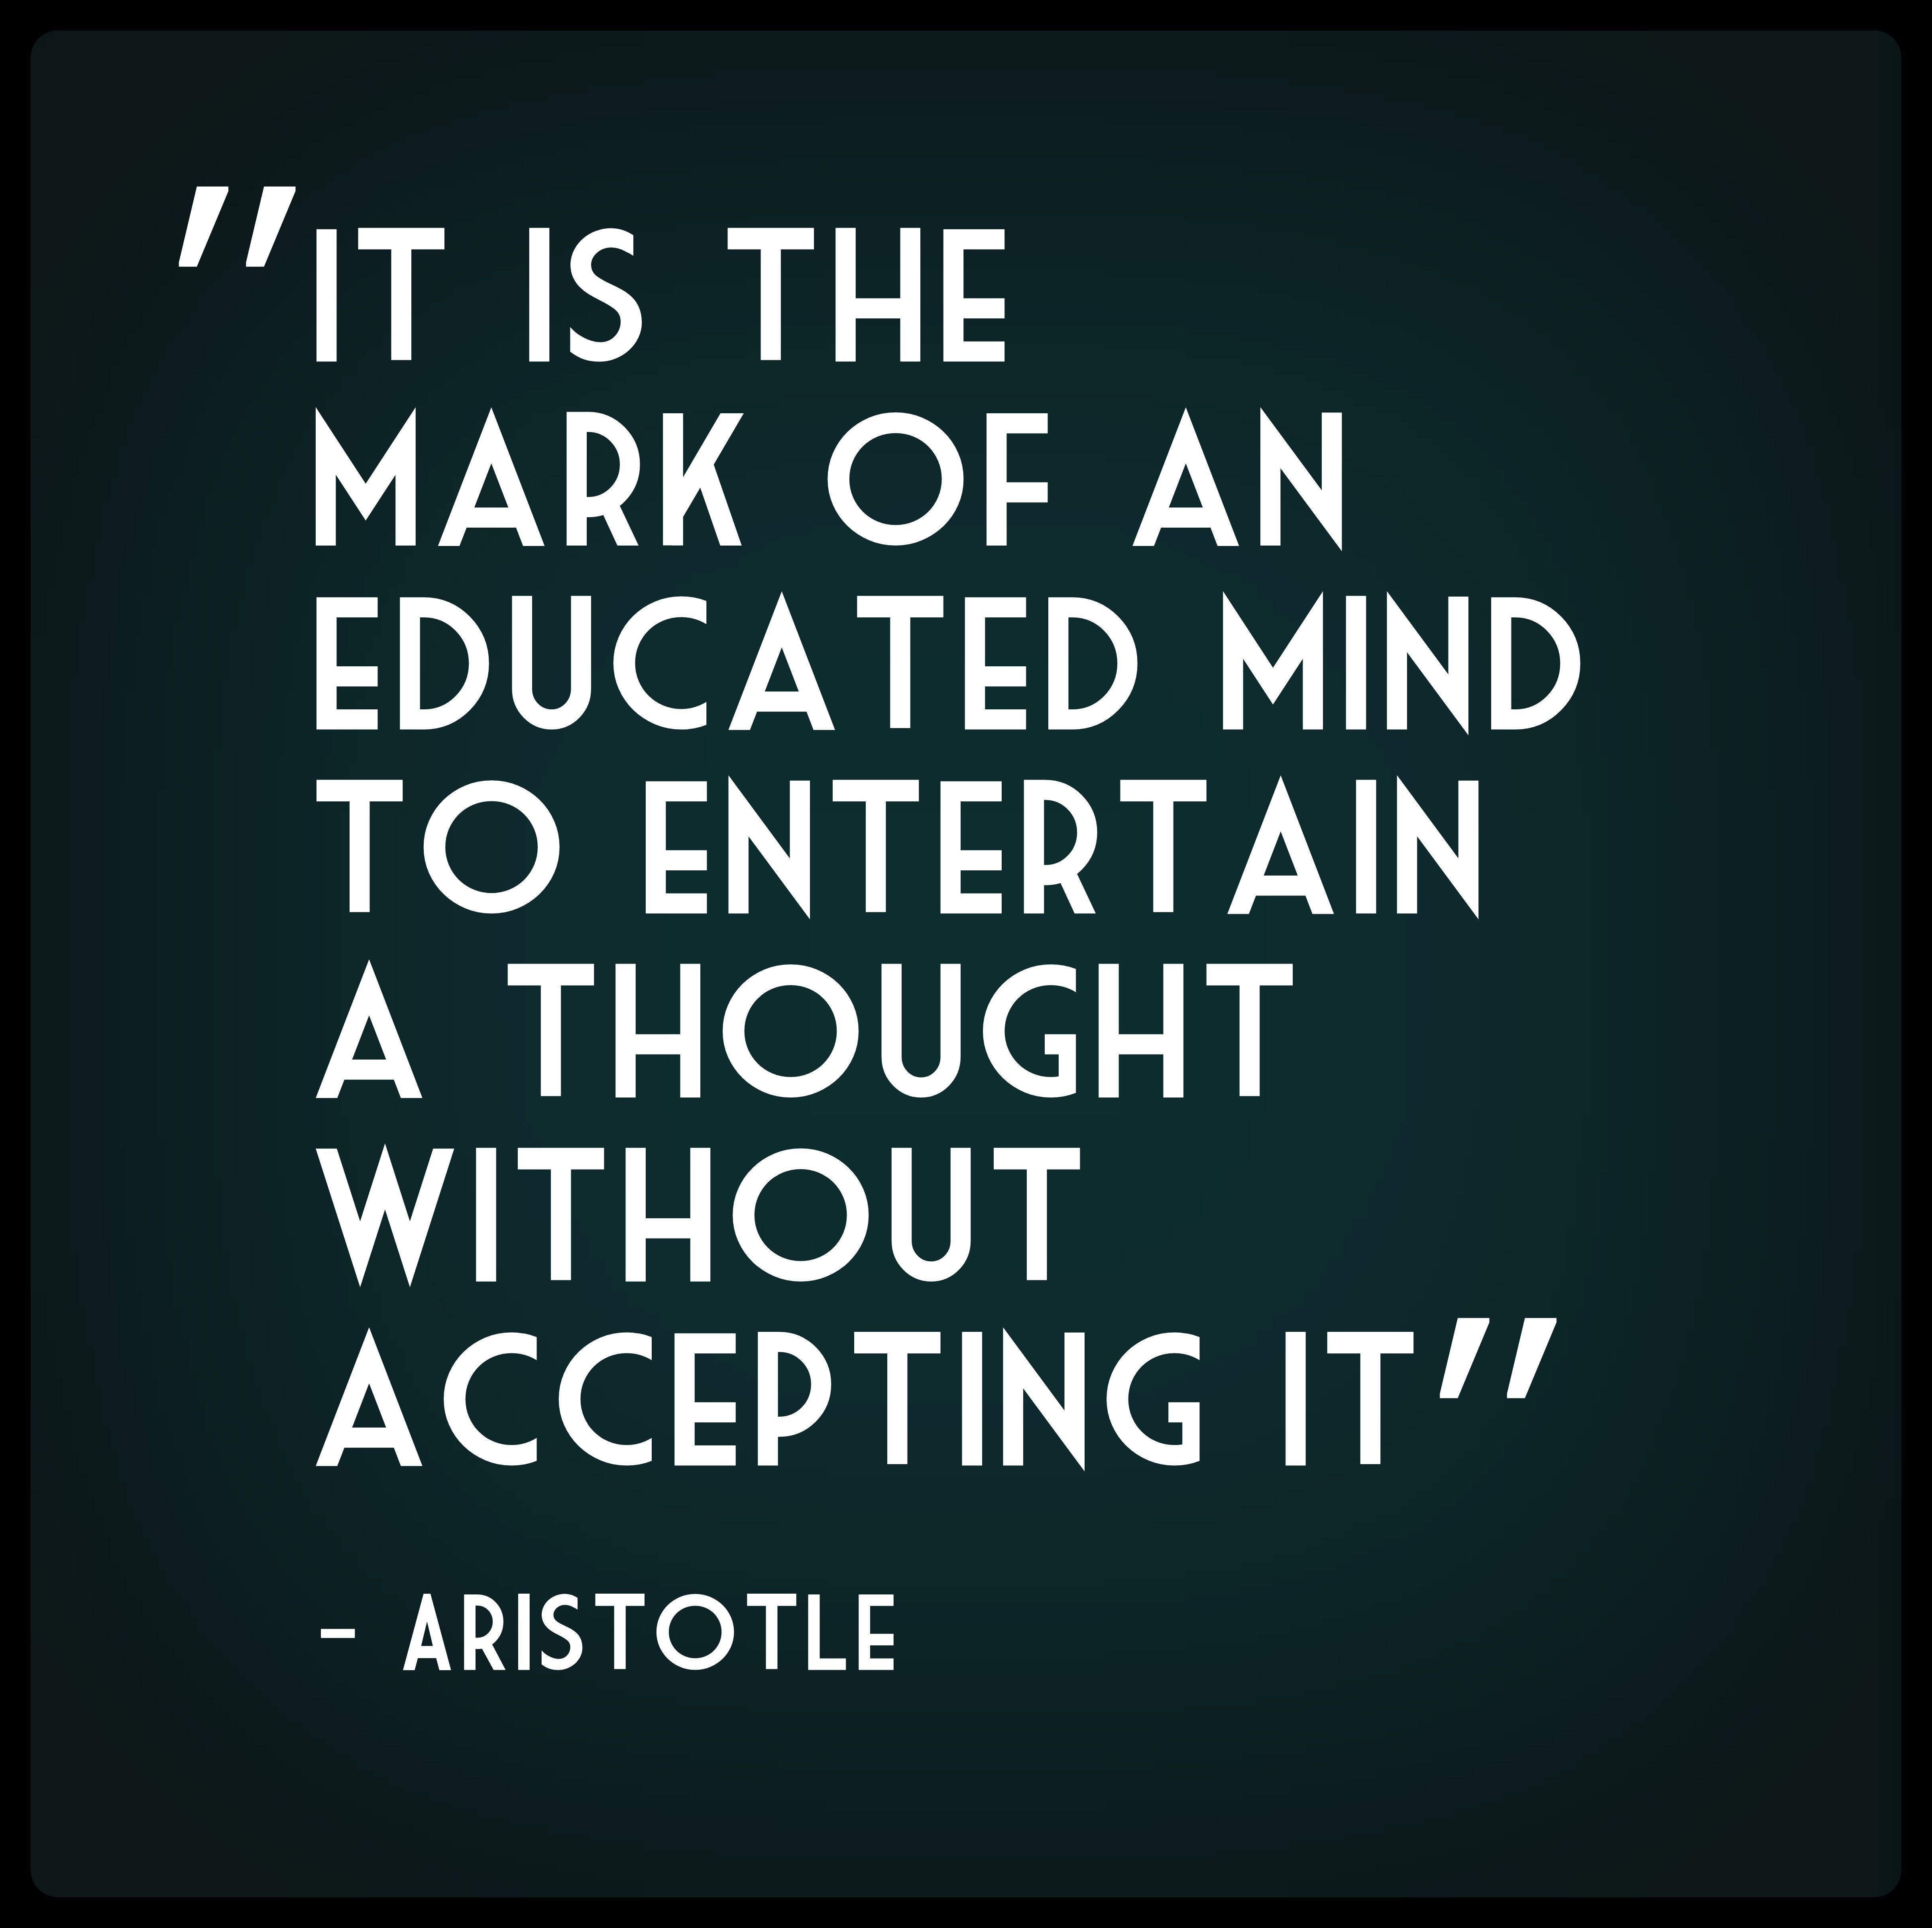 Aristotle Quotes On Education
 "It is the mark of an educated mind to entertain a thought